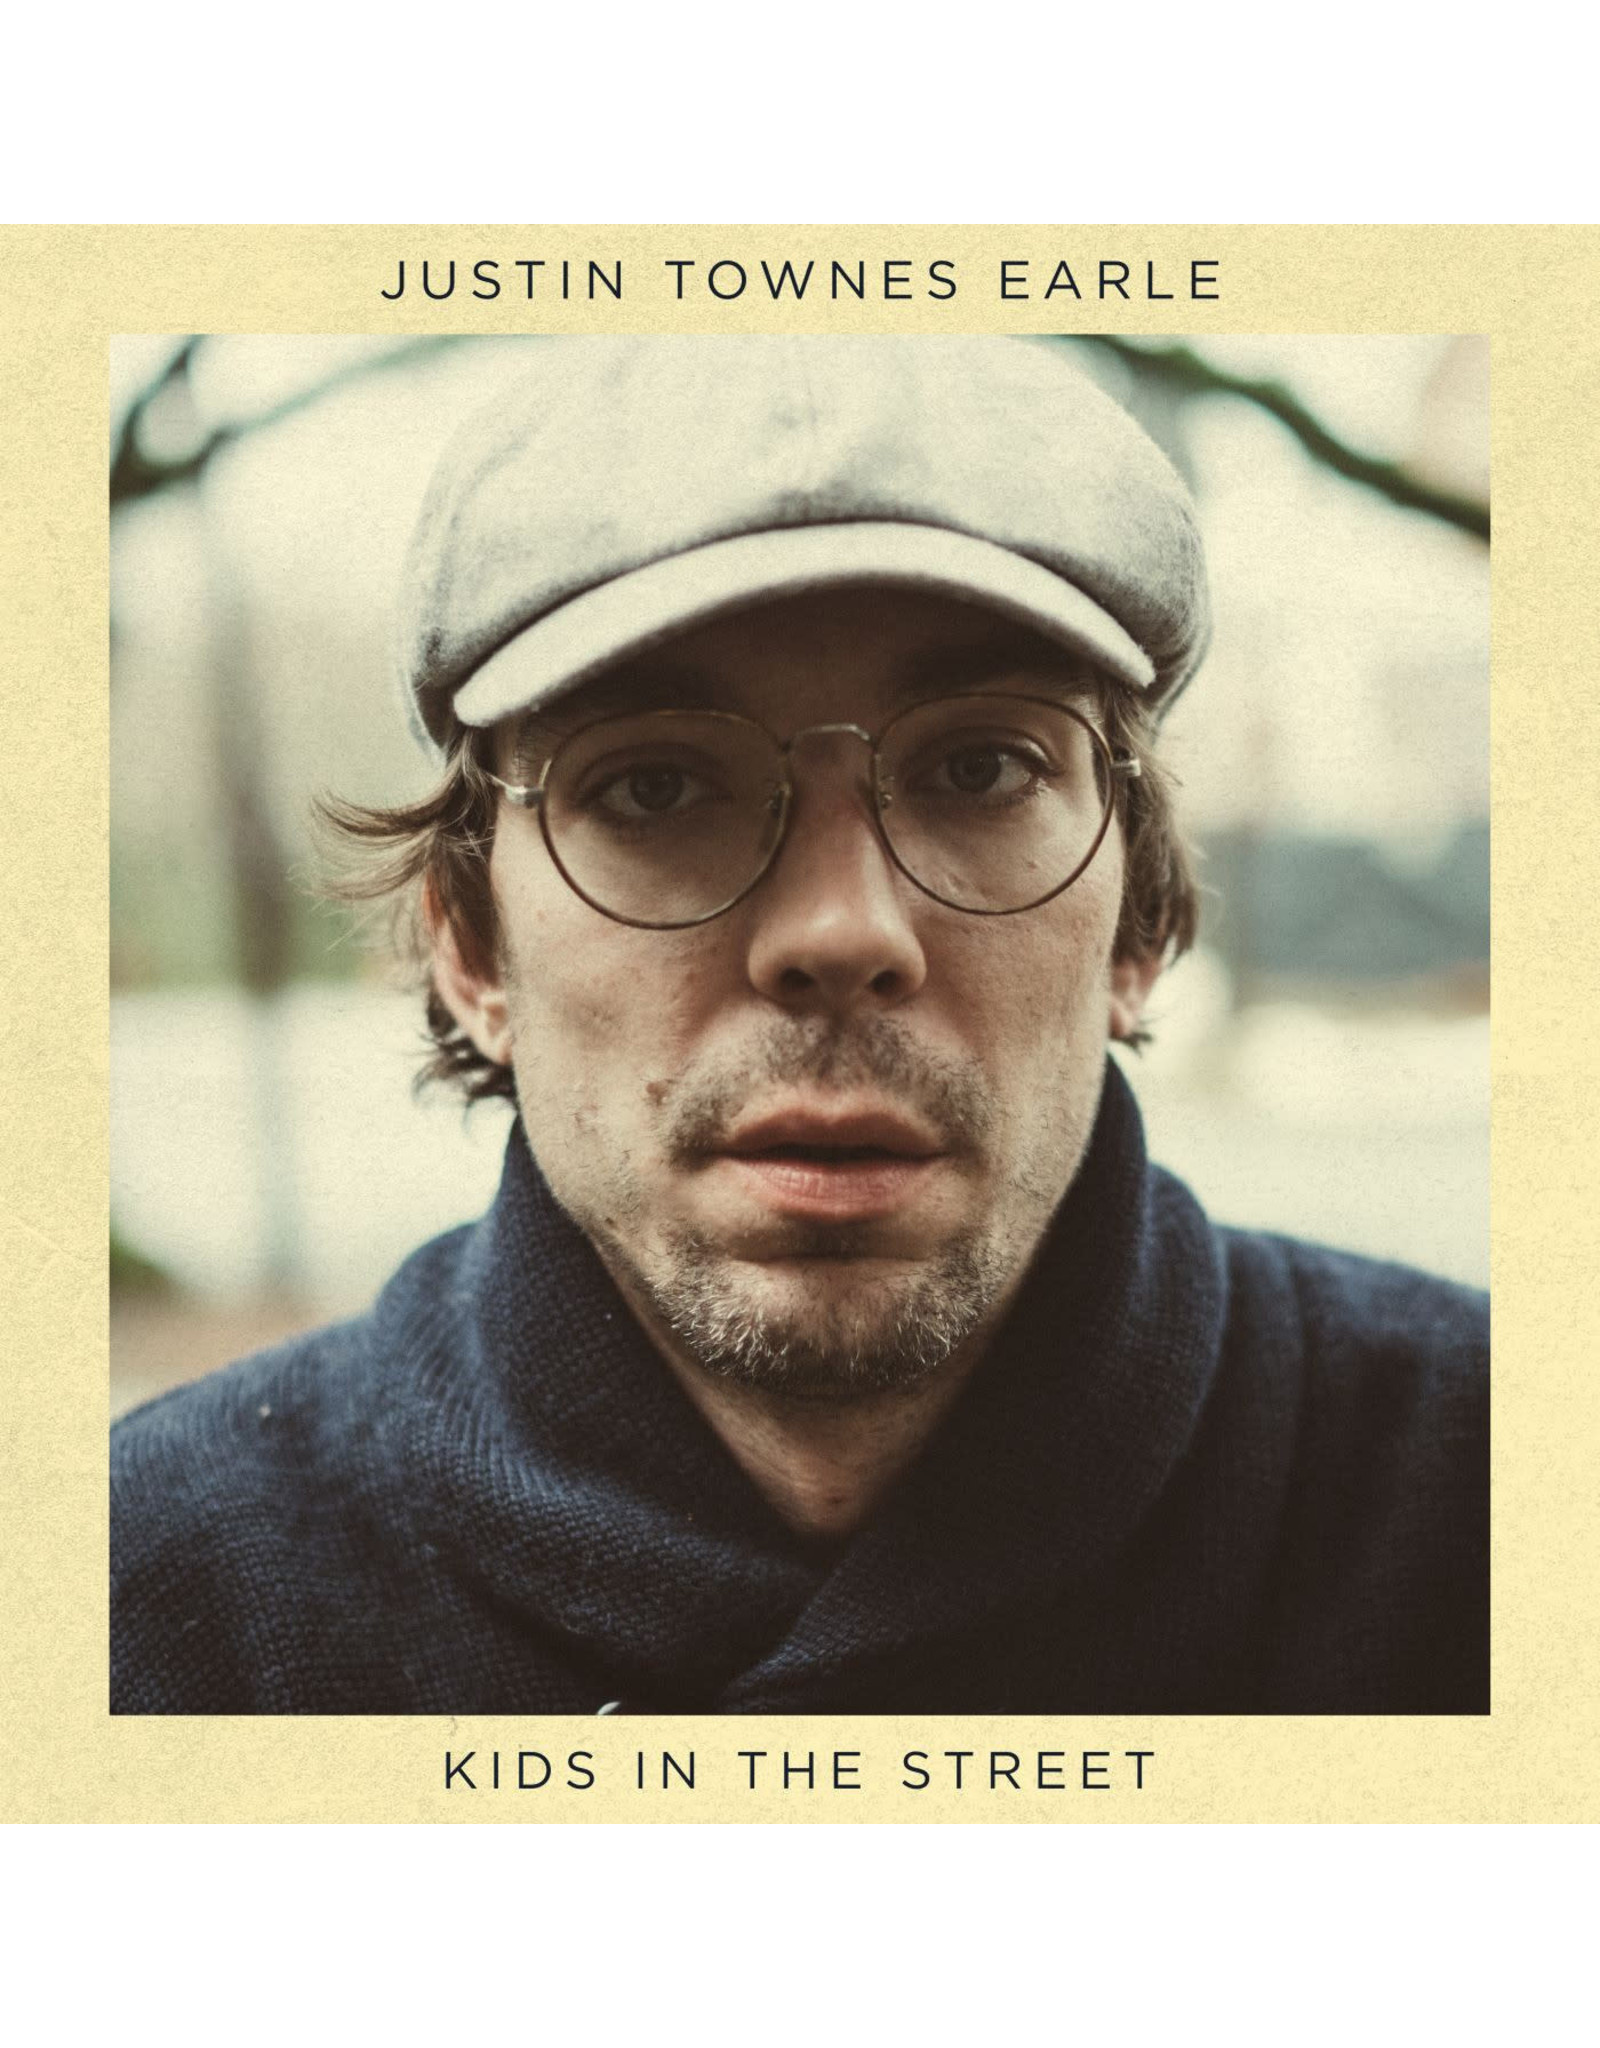 New West Earle, Justin Townes: Kids In The Street (Indie Exclusive, Blue, Green and Champagne) LP